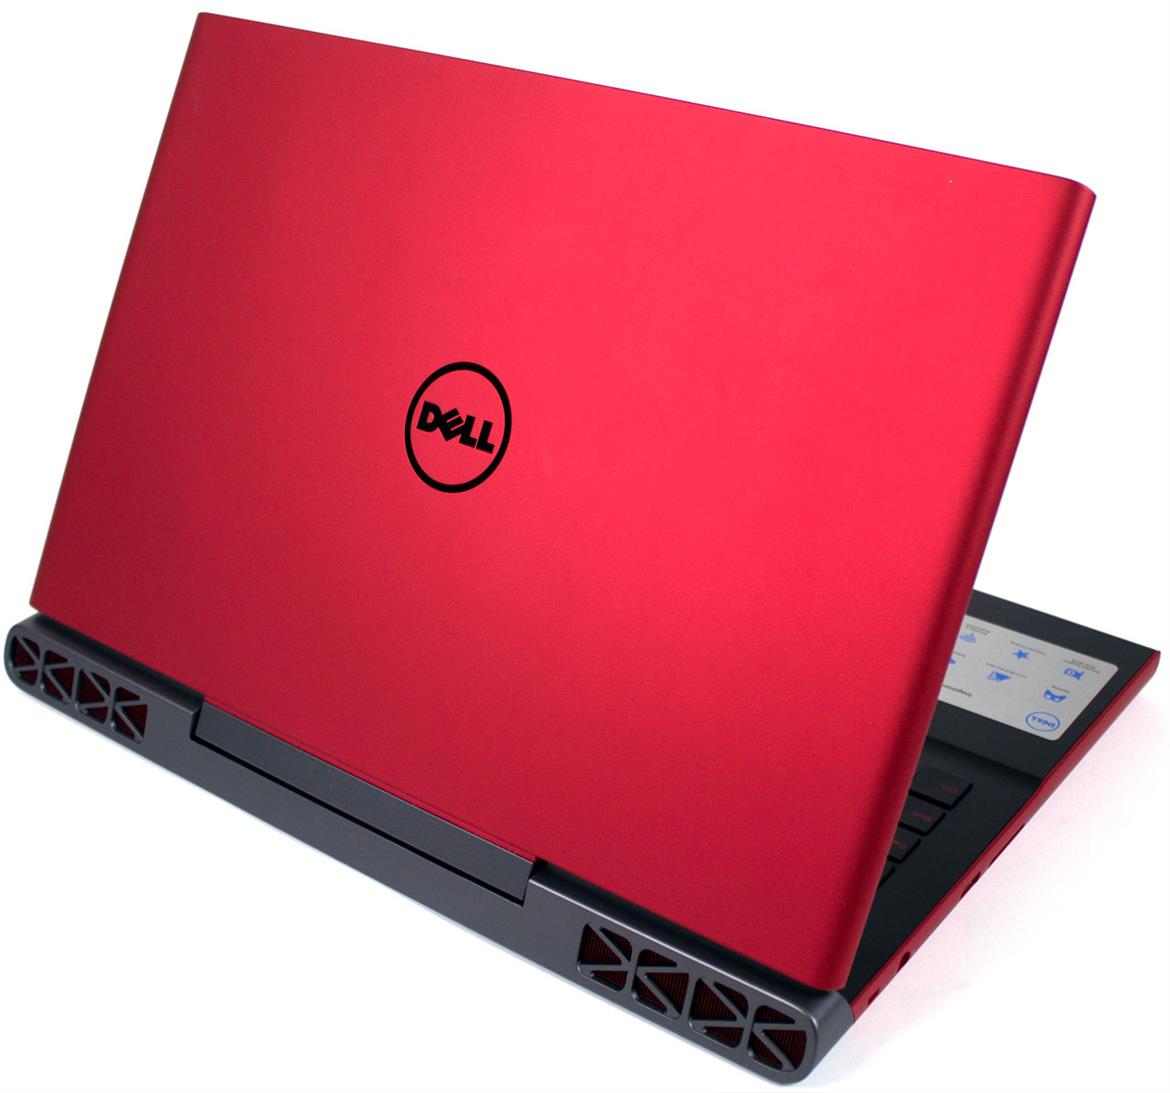 Dell Inspiron 15 7000 Gaming Review: Great Battery Life, Strong Performance, Affordable Price